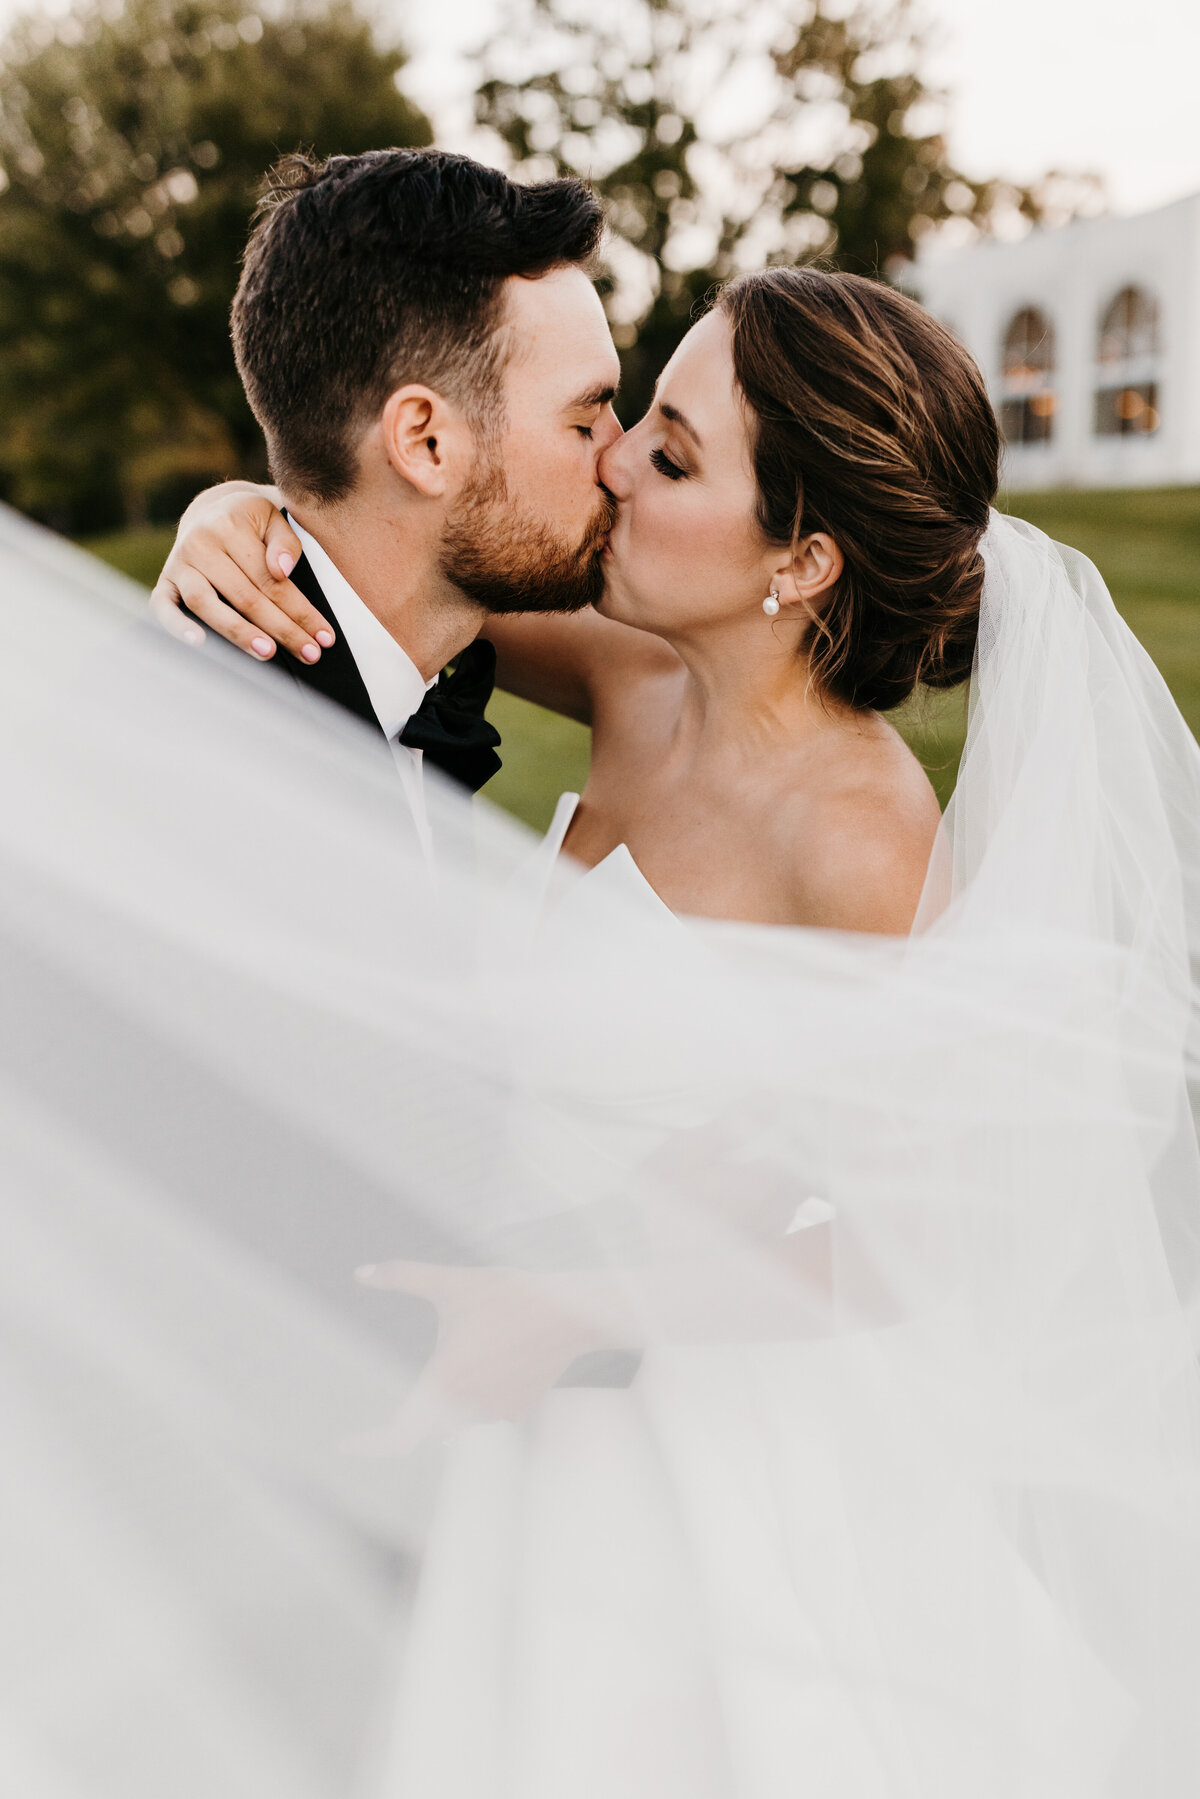 Annie+Eric-Preview-Russell-Heeter-Photography-163